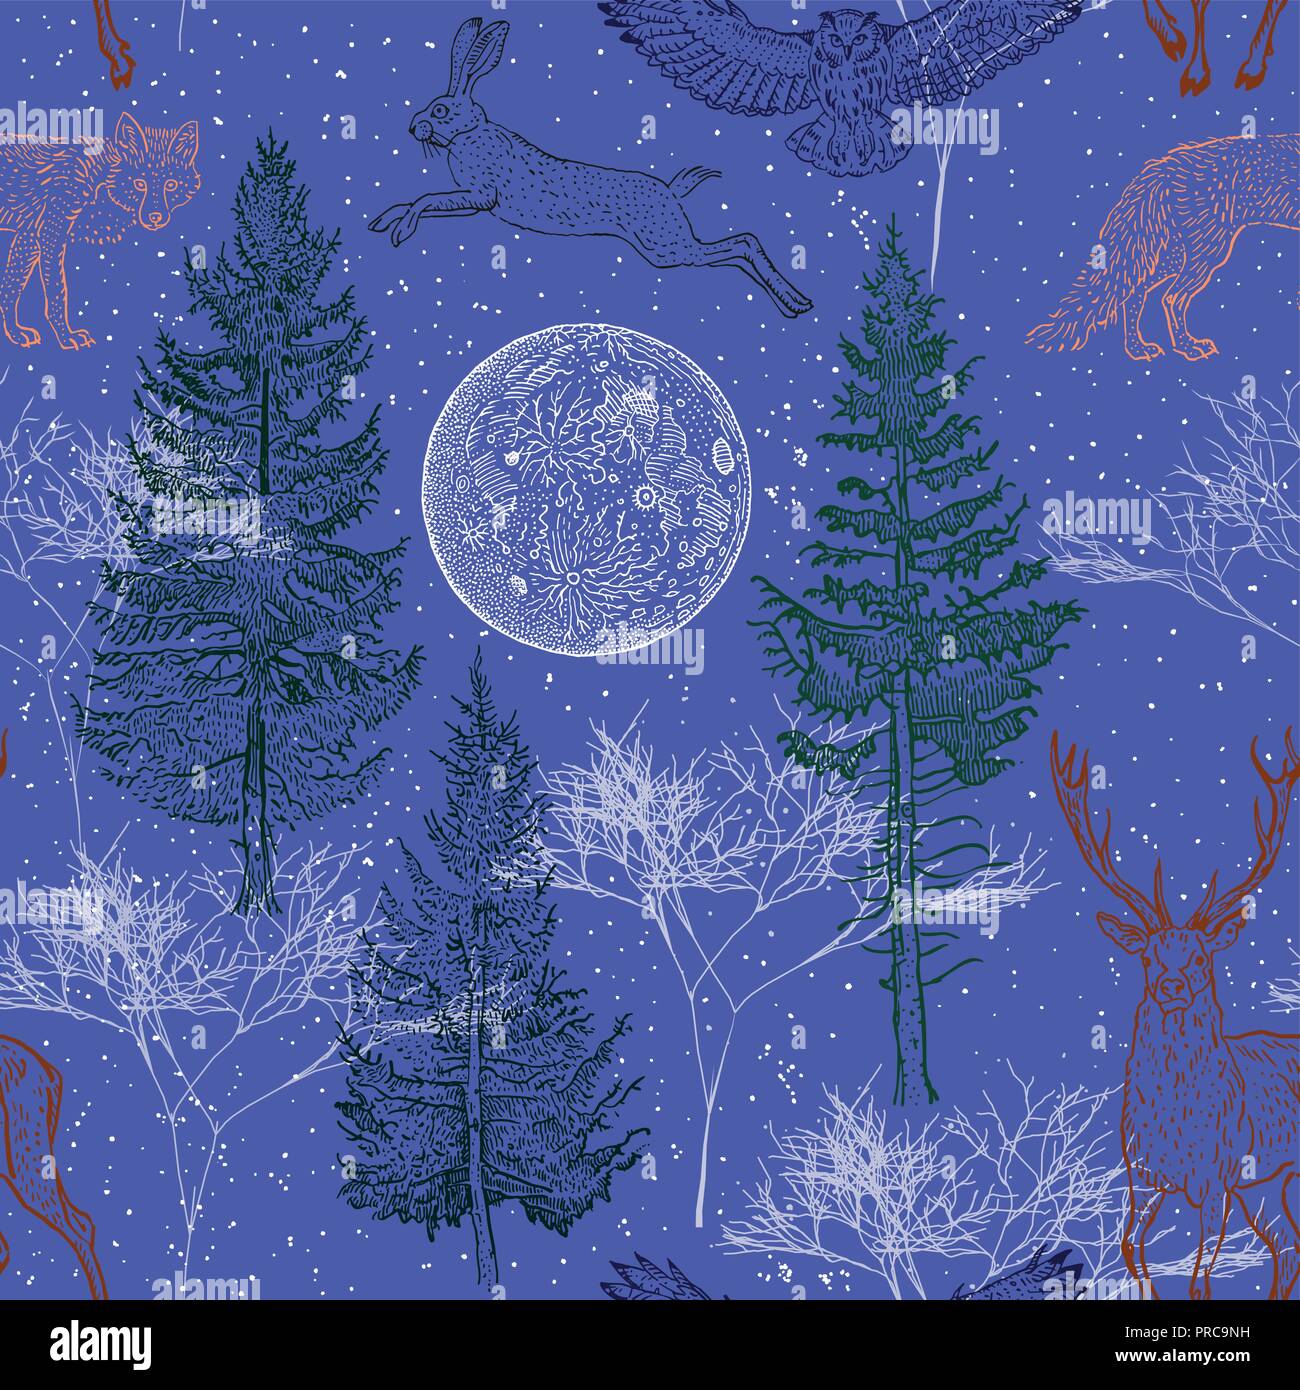 Winter forest seamless pattern. Full moon, spruce, fir tree, fox, hare, deer, owl, snow flakes on a blue background. Vintage engraving style vector illustration. Christmas, New Year holidays, nature. Stock Vector